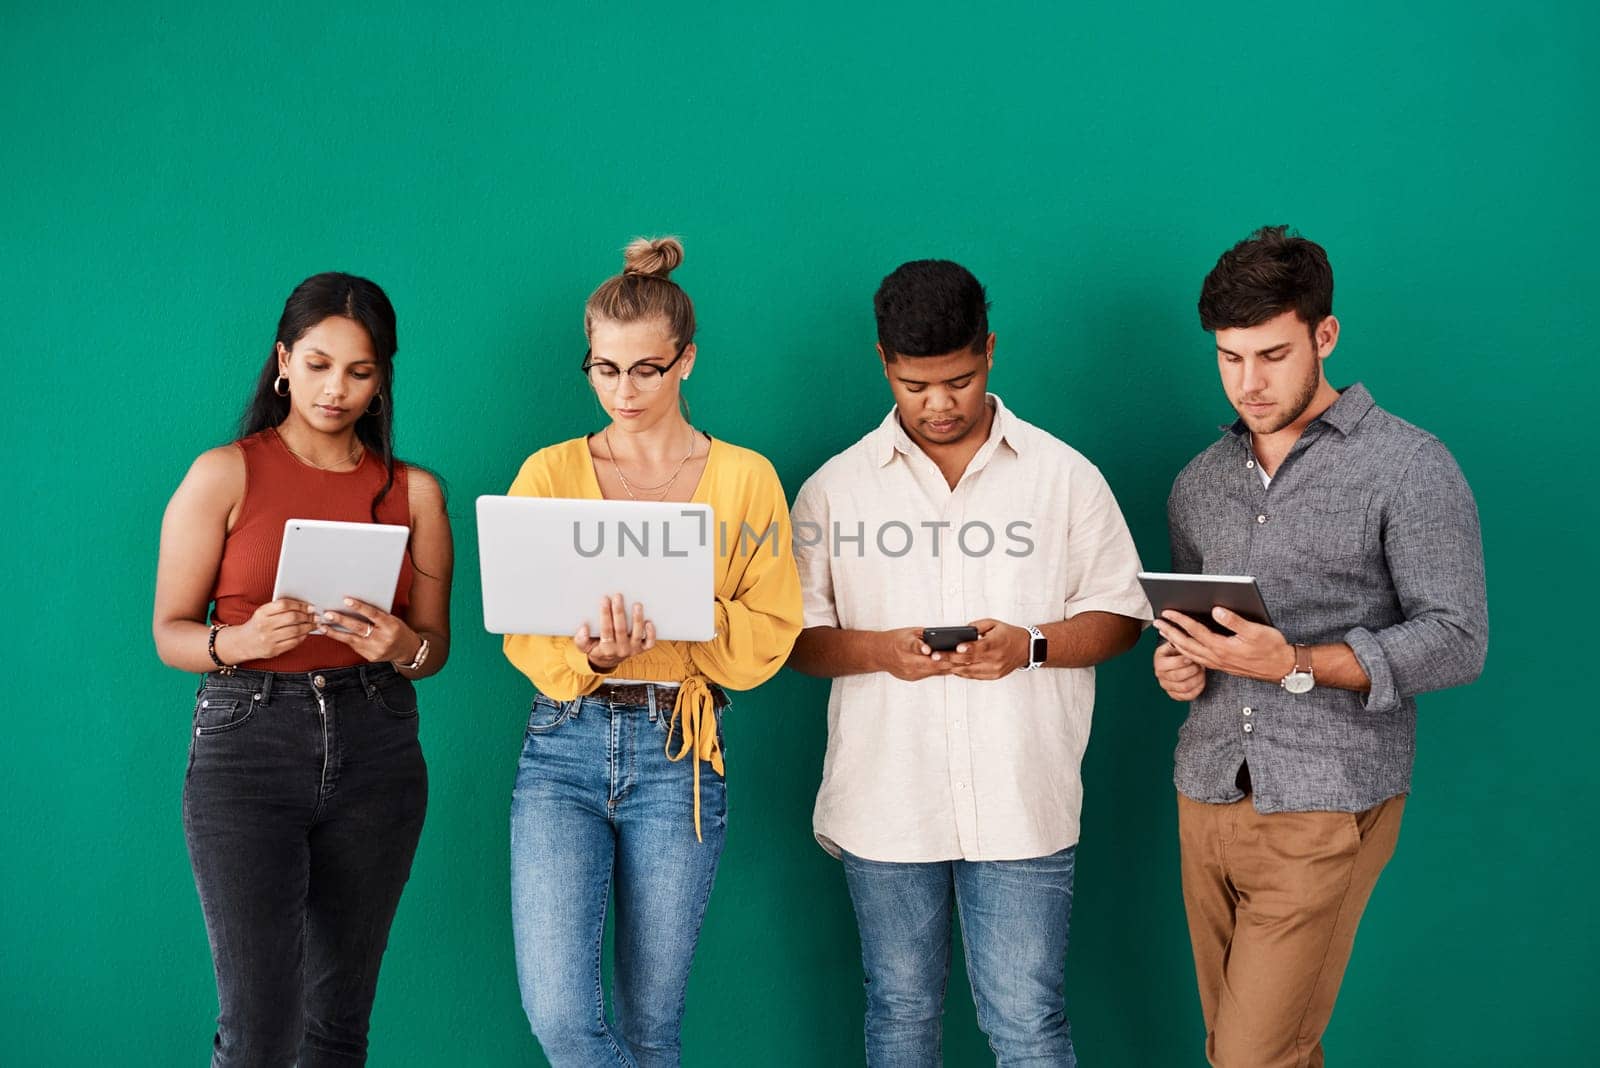 Staying connected to their online and mobile channels. a group of young designers using digital devices while standing together against a green background